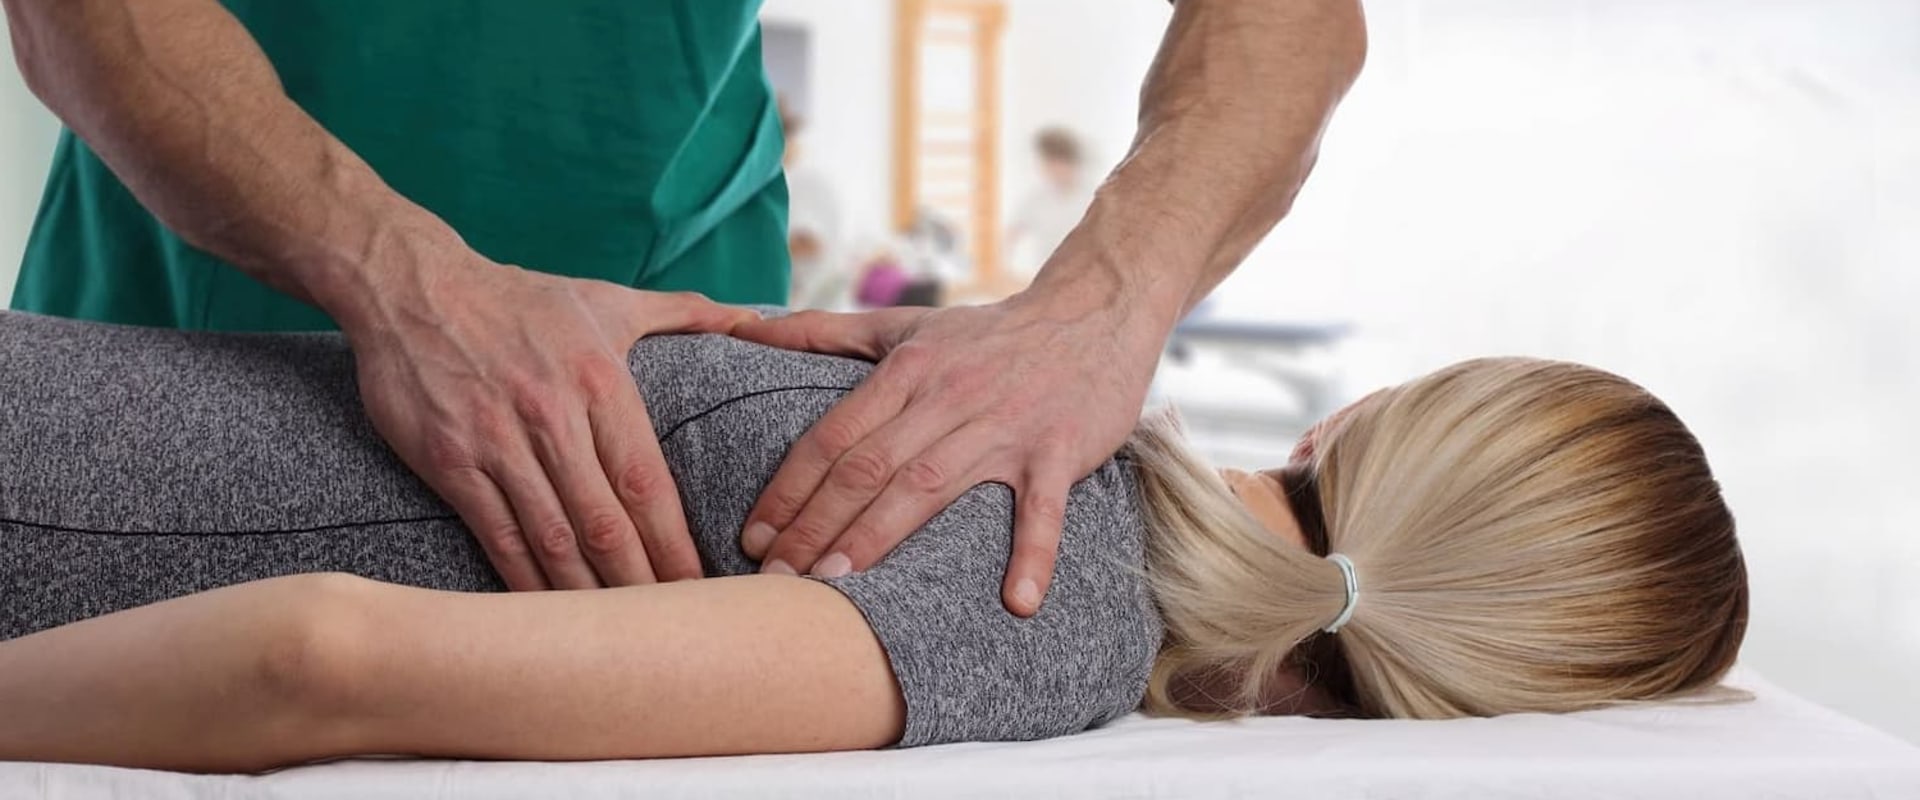 What's the Difference Between a Medical Doctor and an Australian Chiropractor?